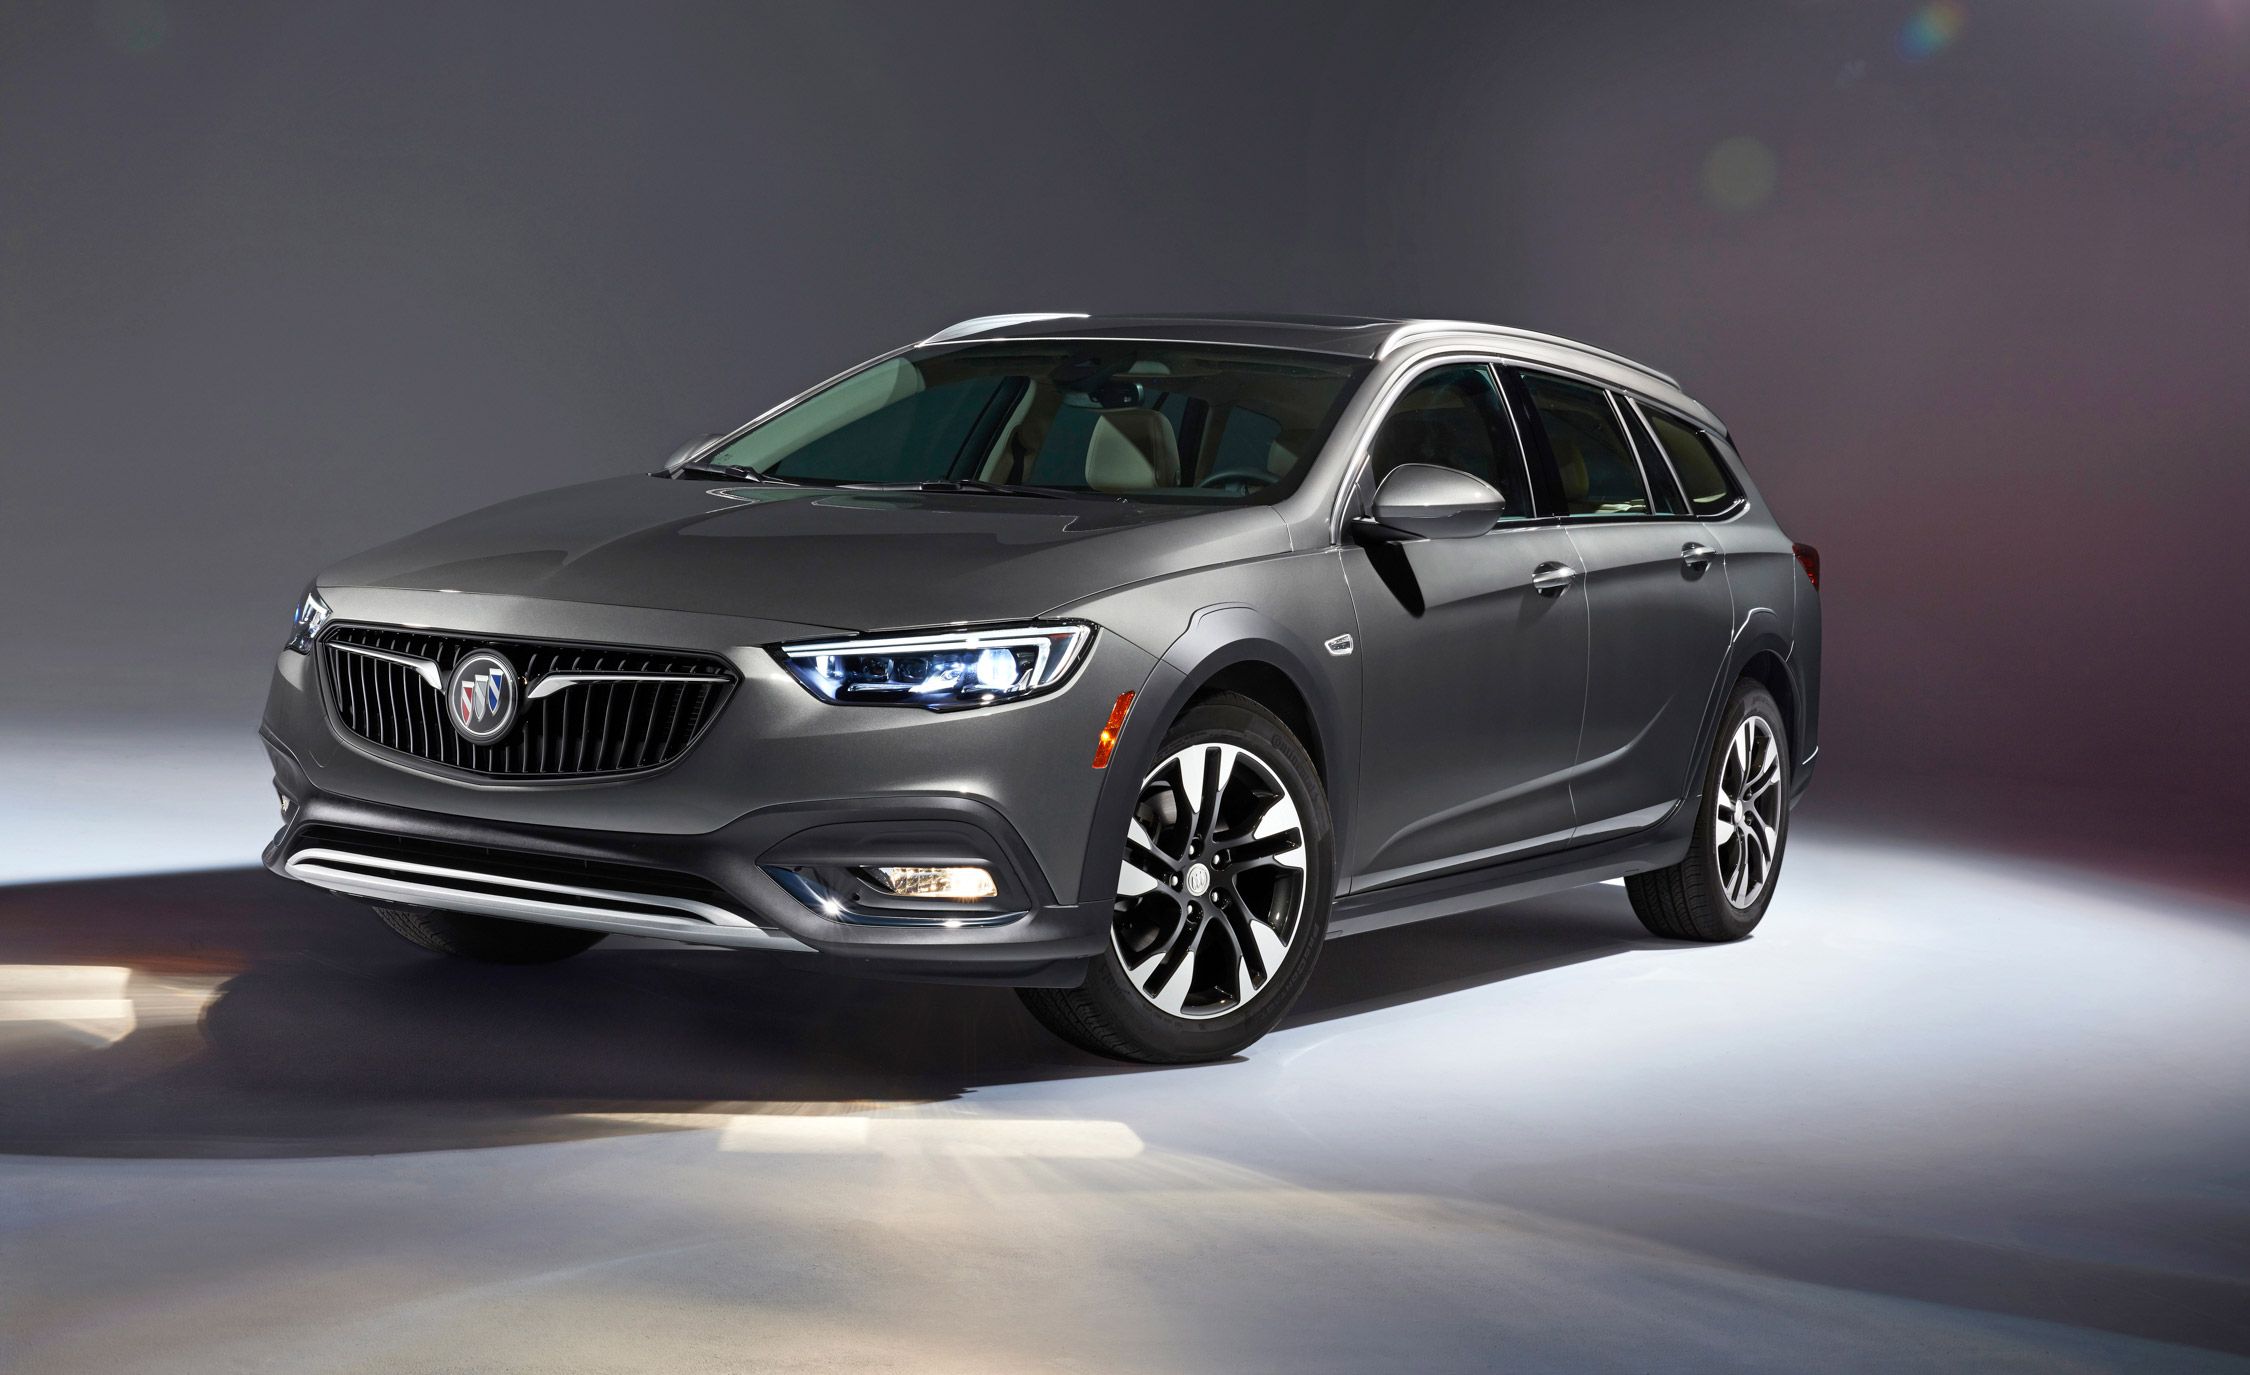 2020 Buick Regal TourX Review, Pricing, and Specs